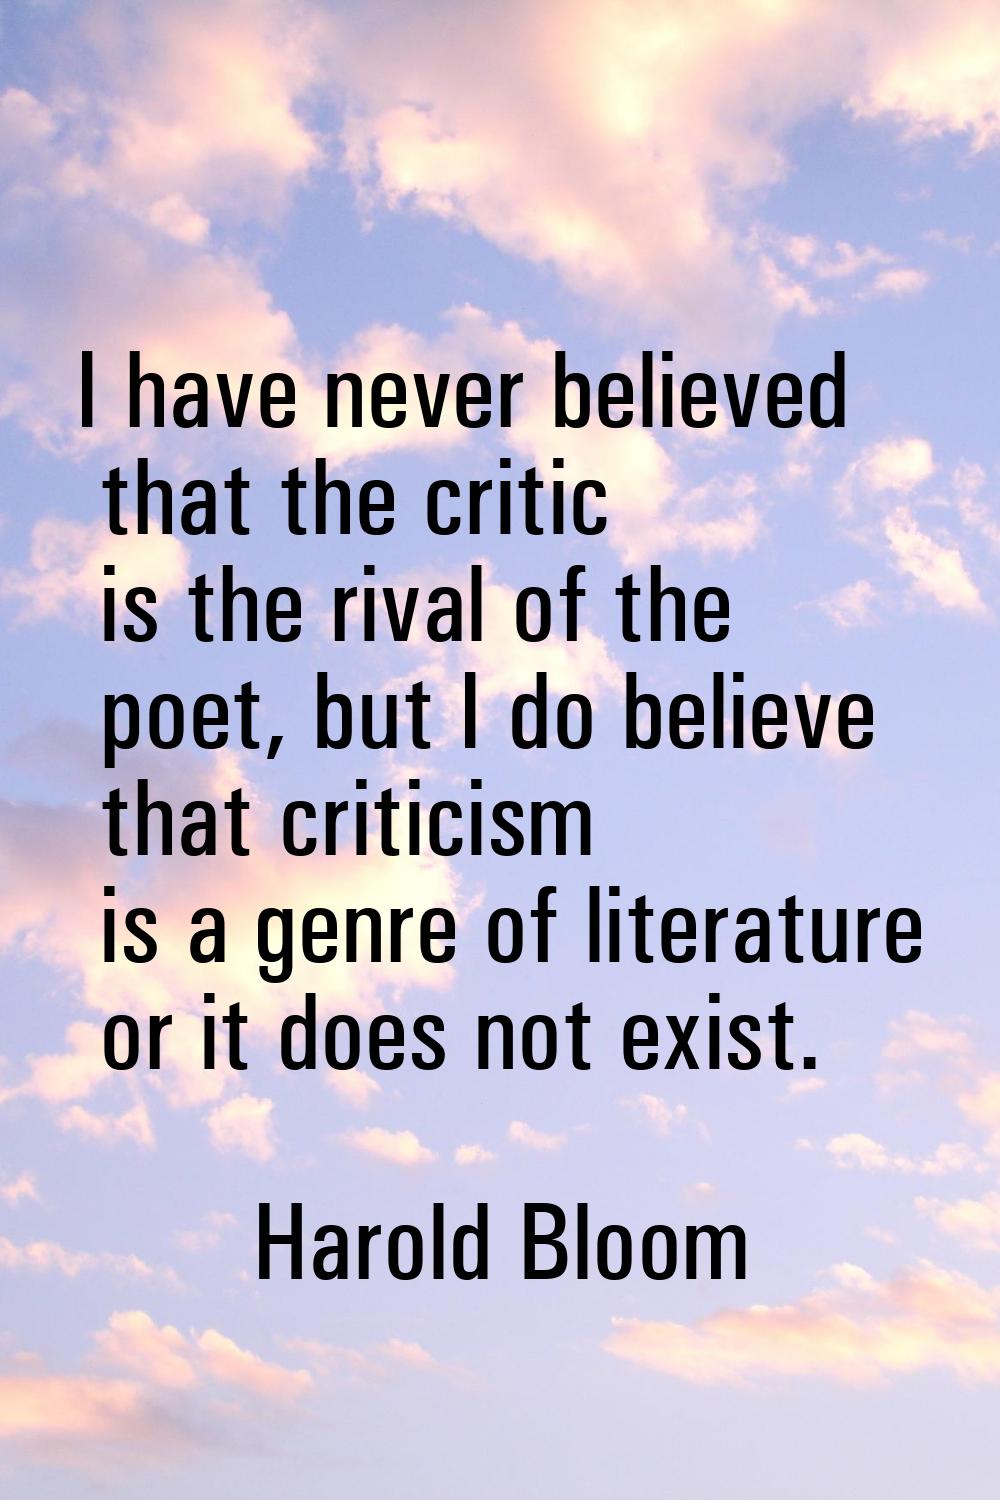 I have never believed that the critic is the rival of the poet, but I do believe that criticism is 